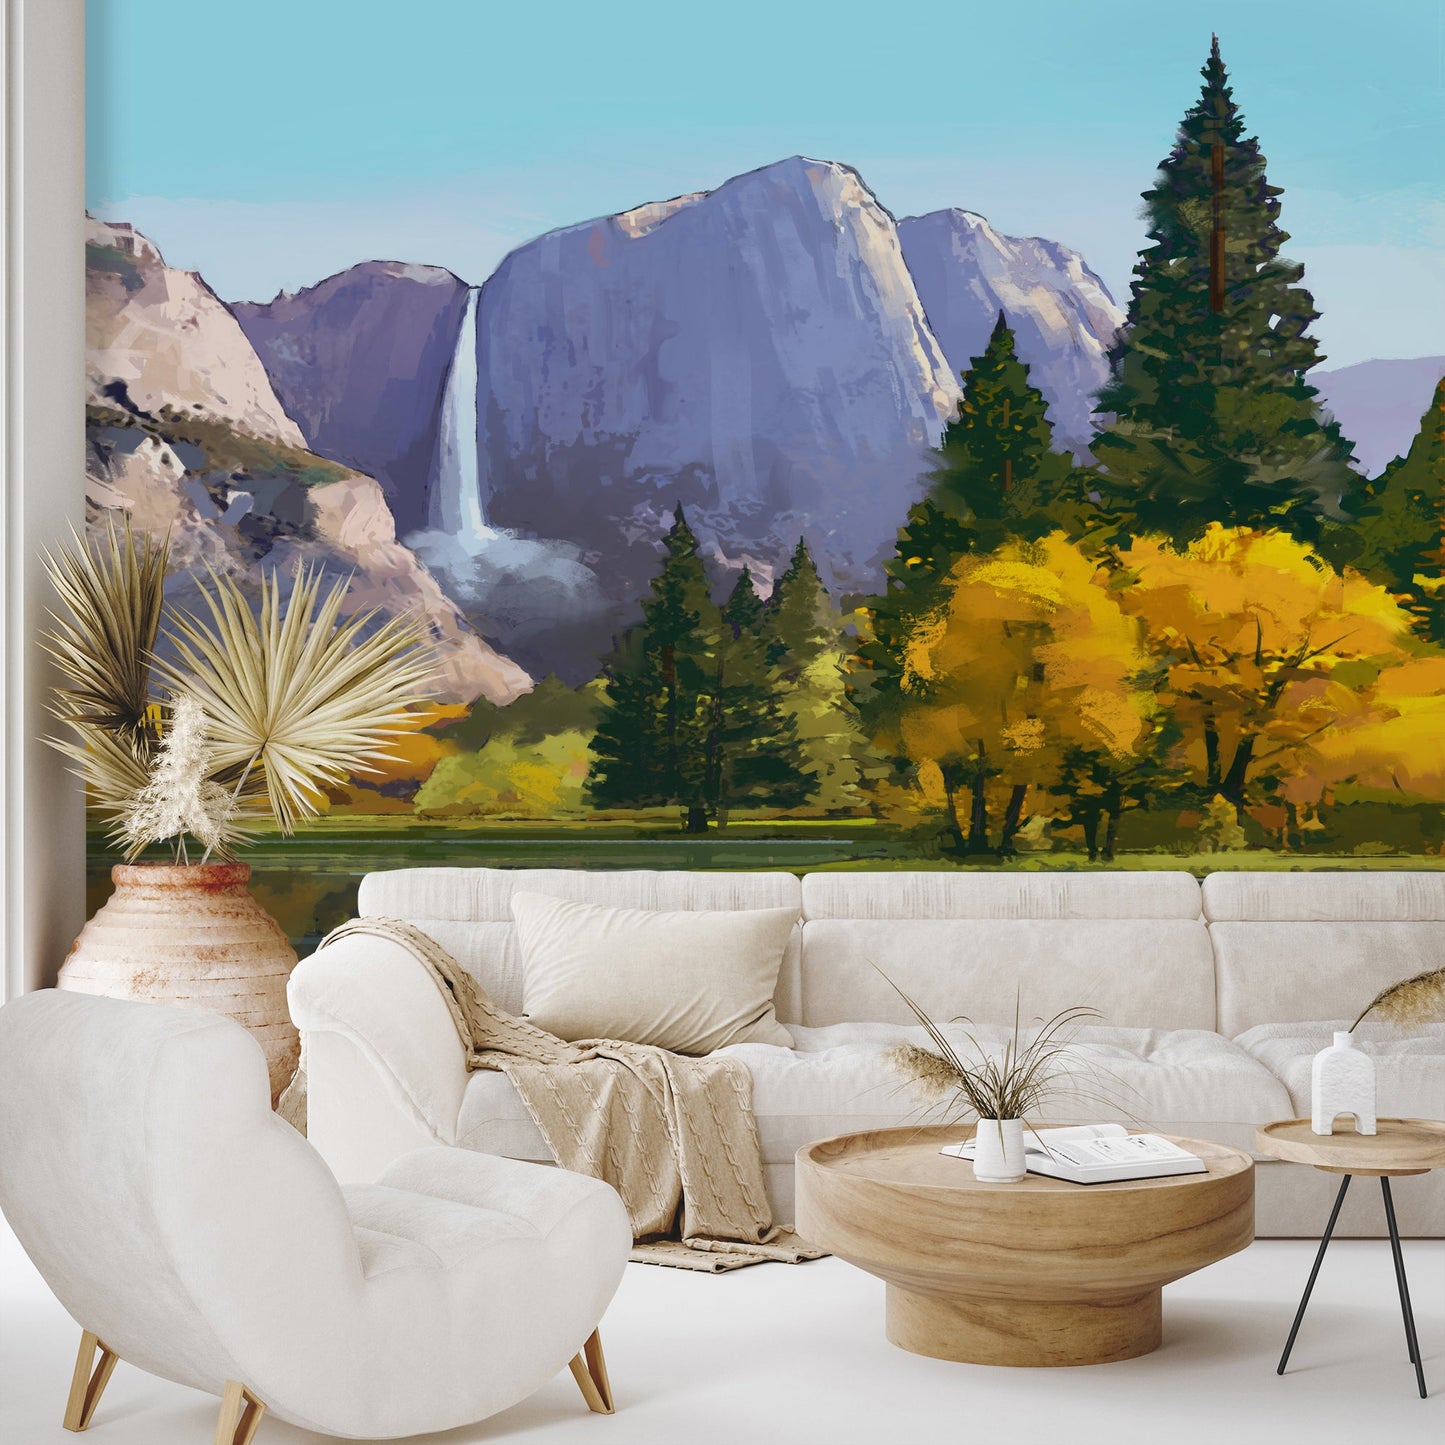 Peel & Stick Wall Mural - Yosemite National Park By Anderson Design Group